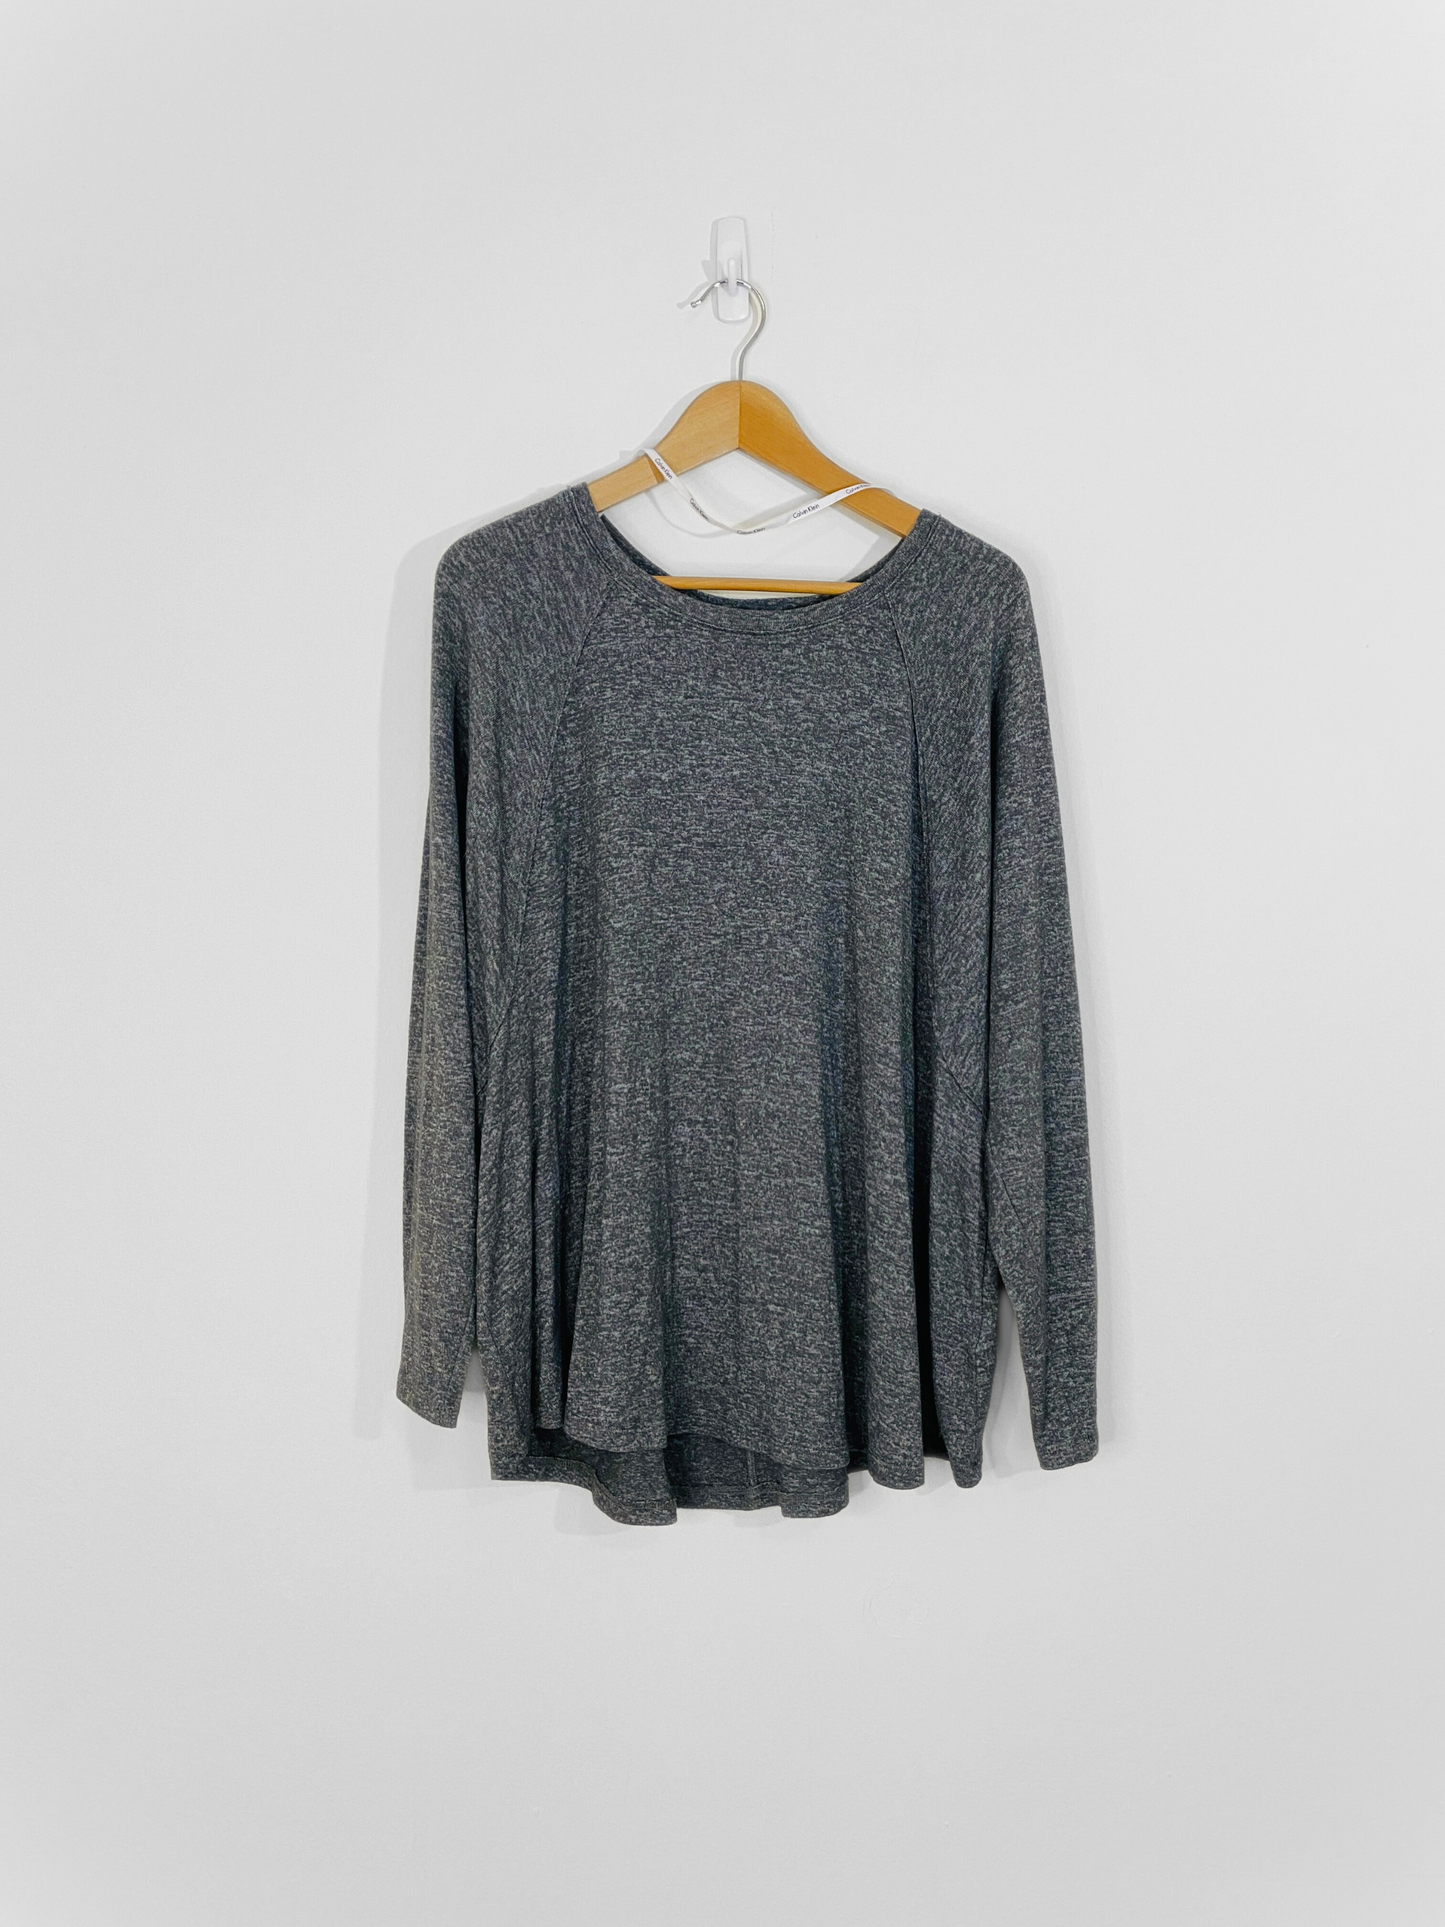 Green/Grey Heathered Pullover (1X)